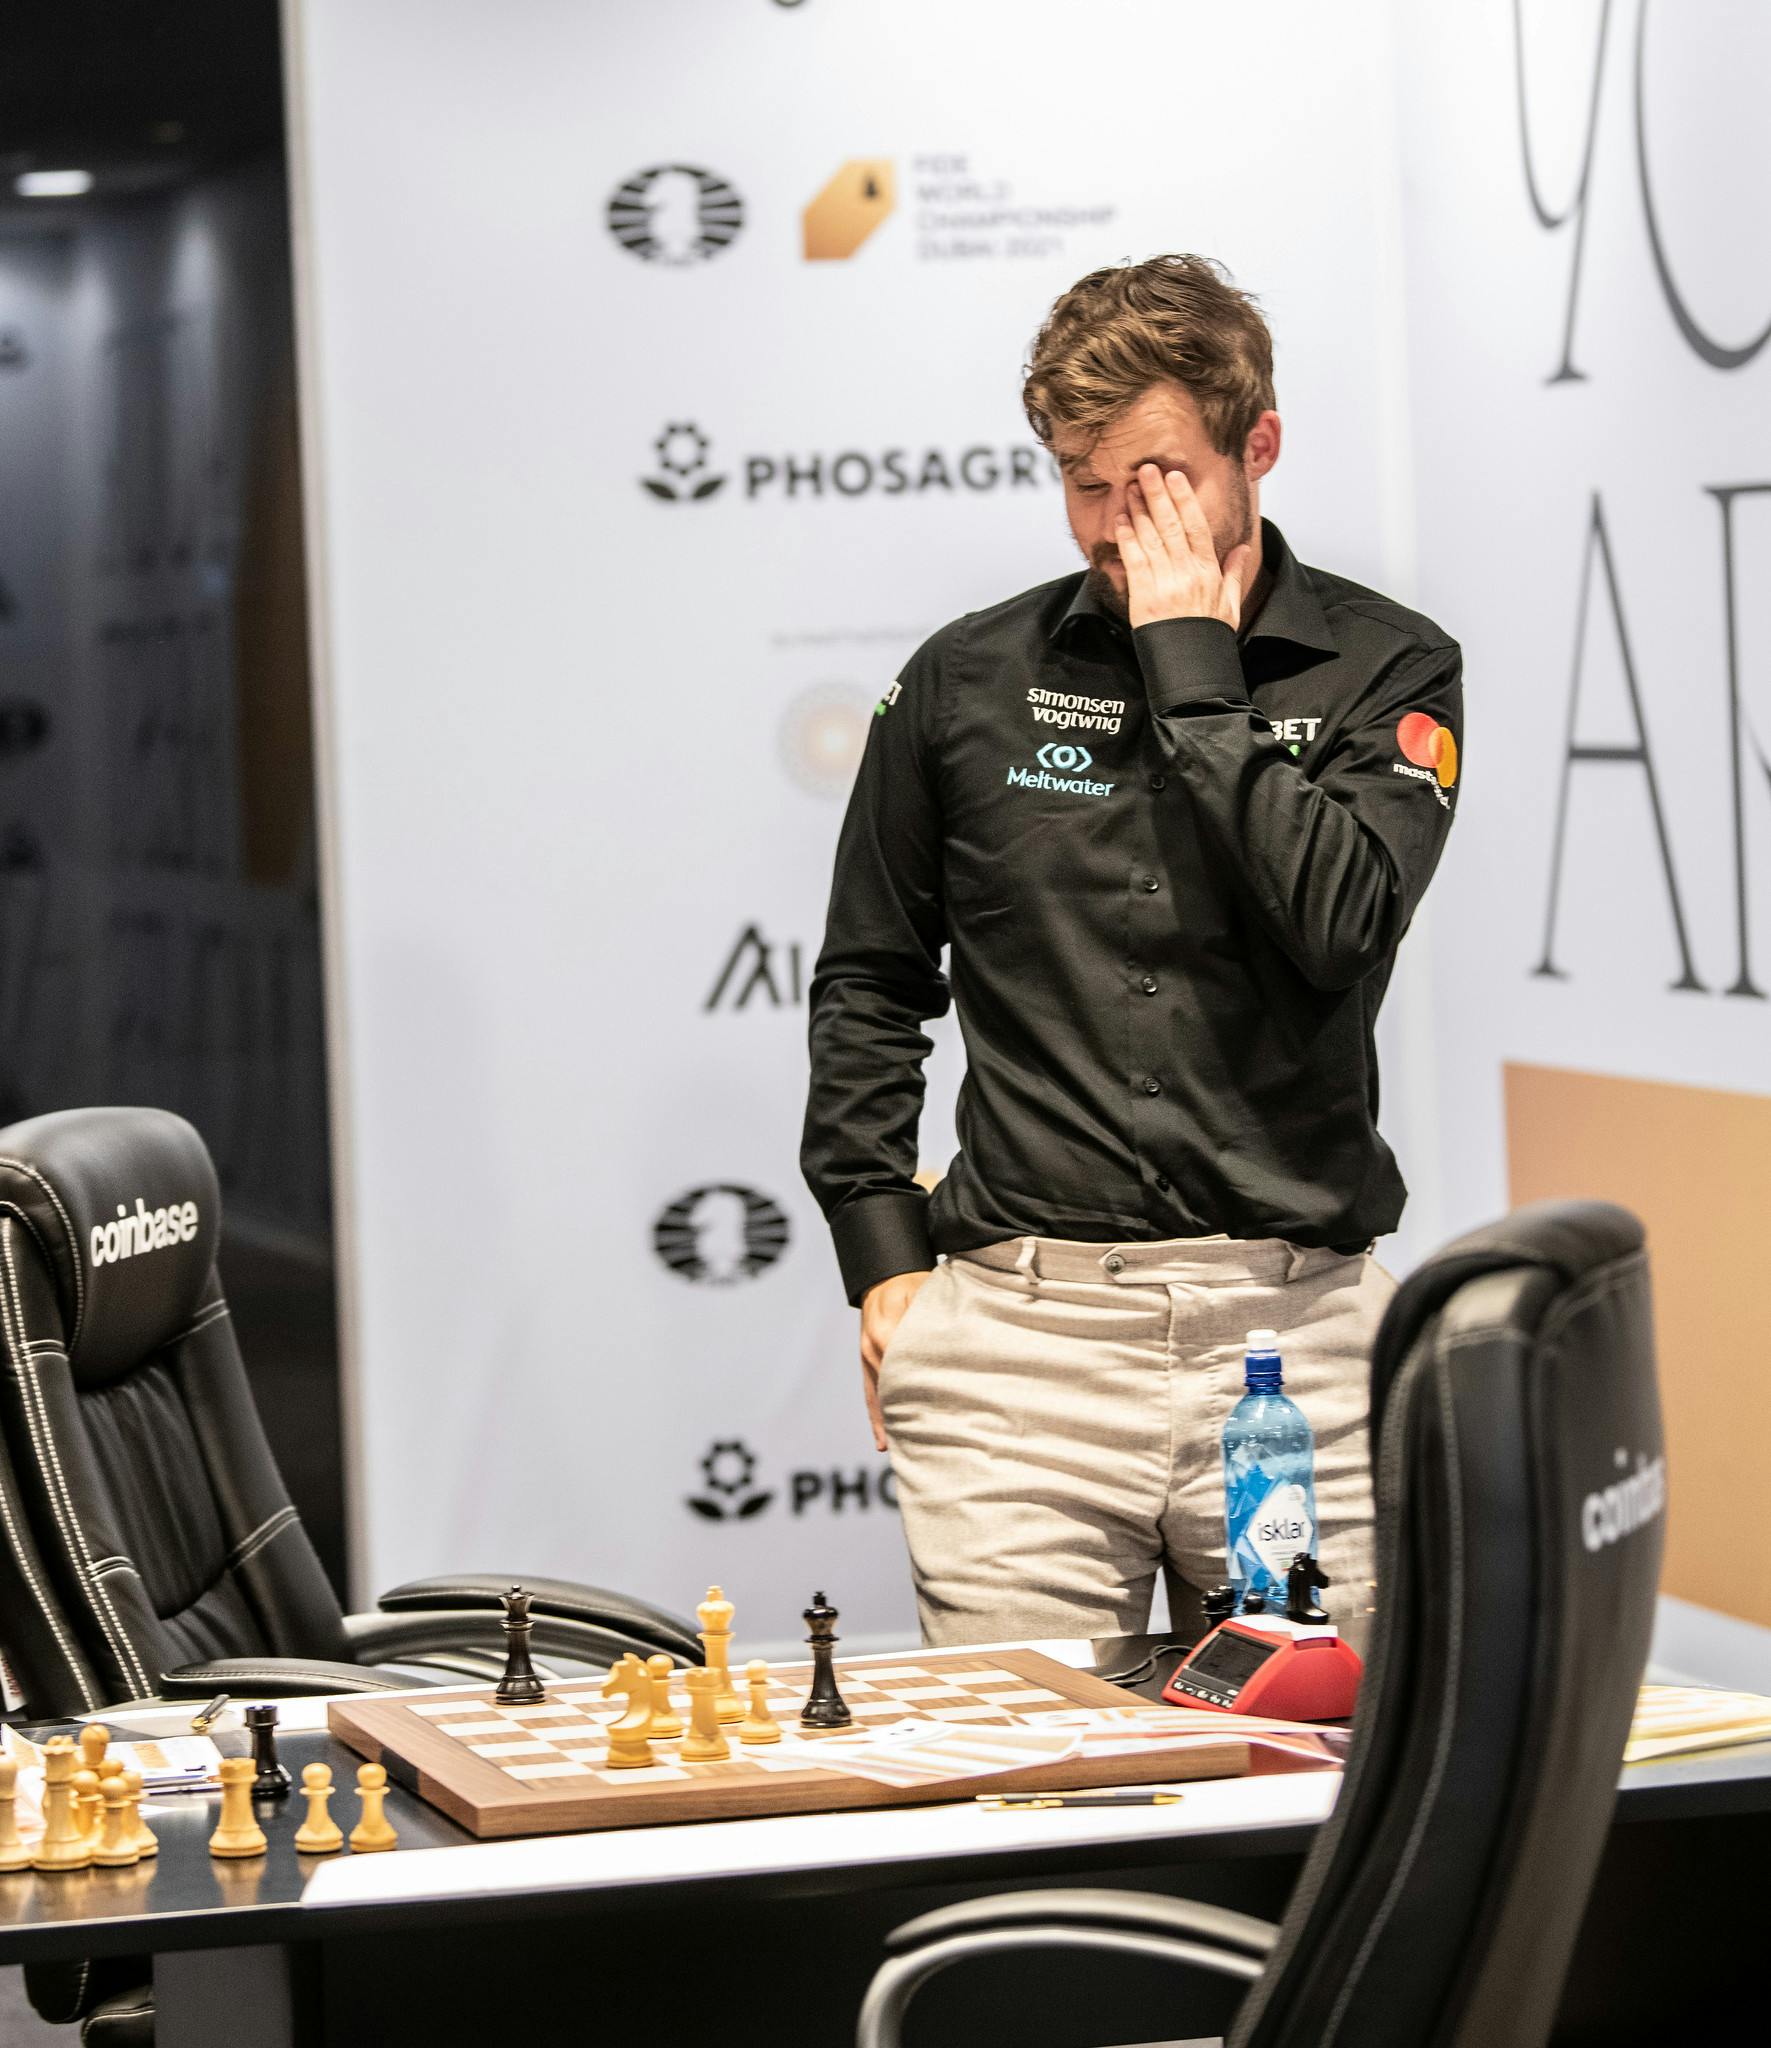 Nepomniachtchi Inches Closer To World Championship Title After 82-Move Draw  